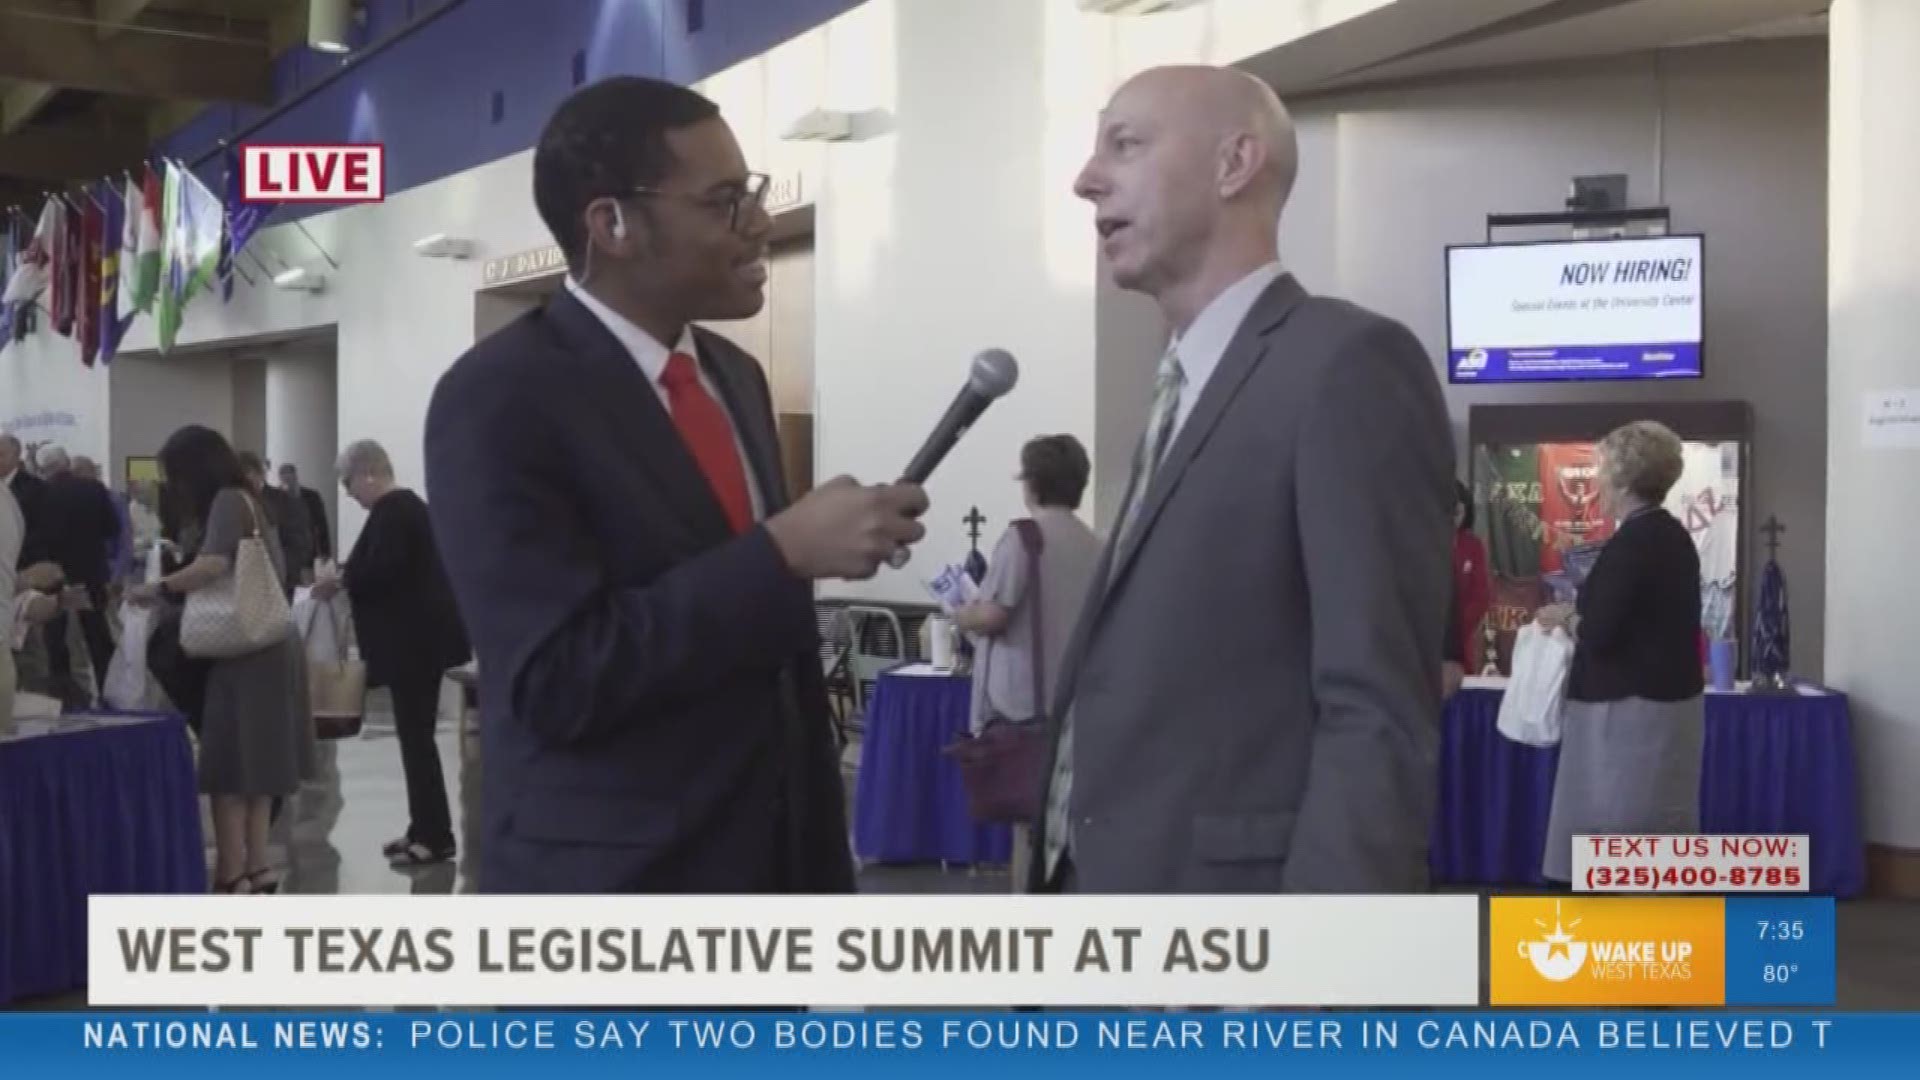 Our Malik Mingo spoke with the president of the San Angelo Chamber of Commerce about what people can expect at the 16th annual West Texas Legislative Summit at Angelo State University.